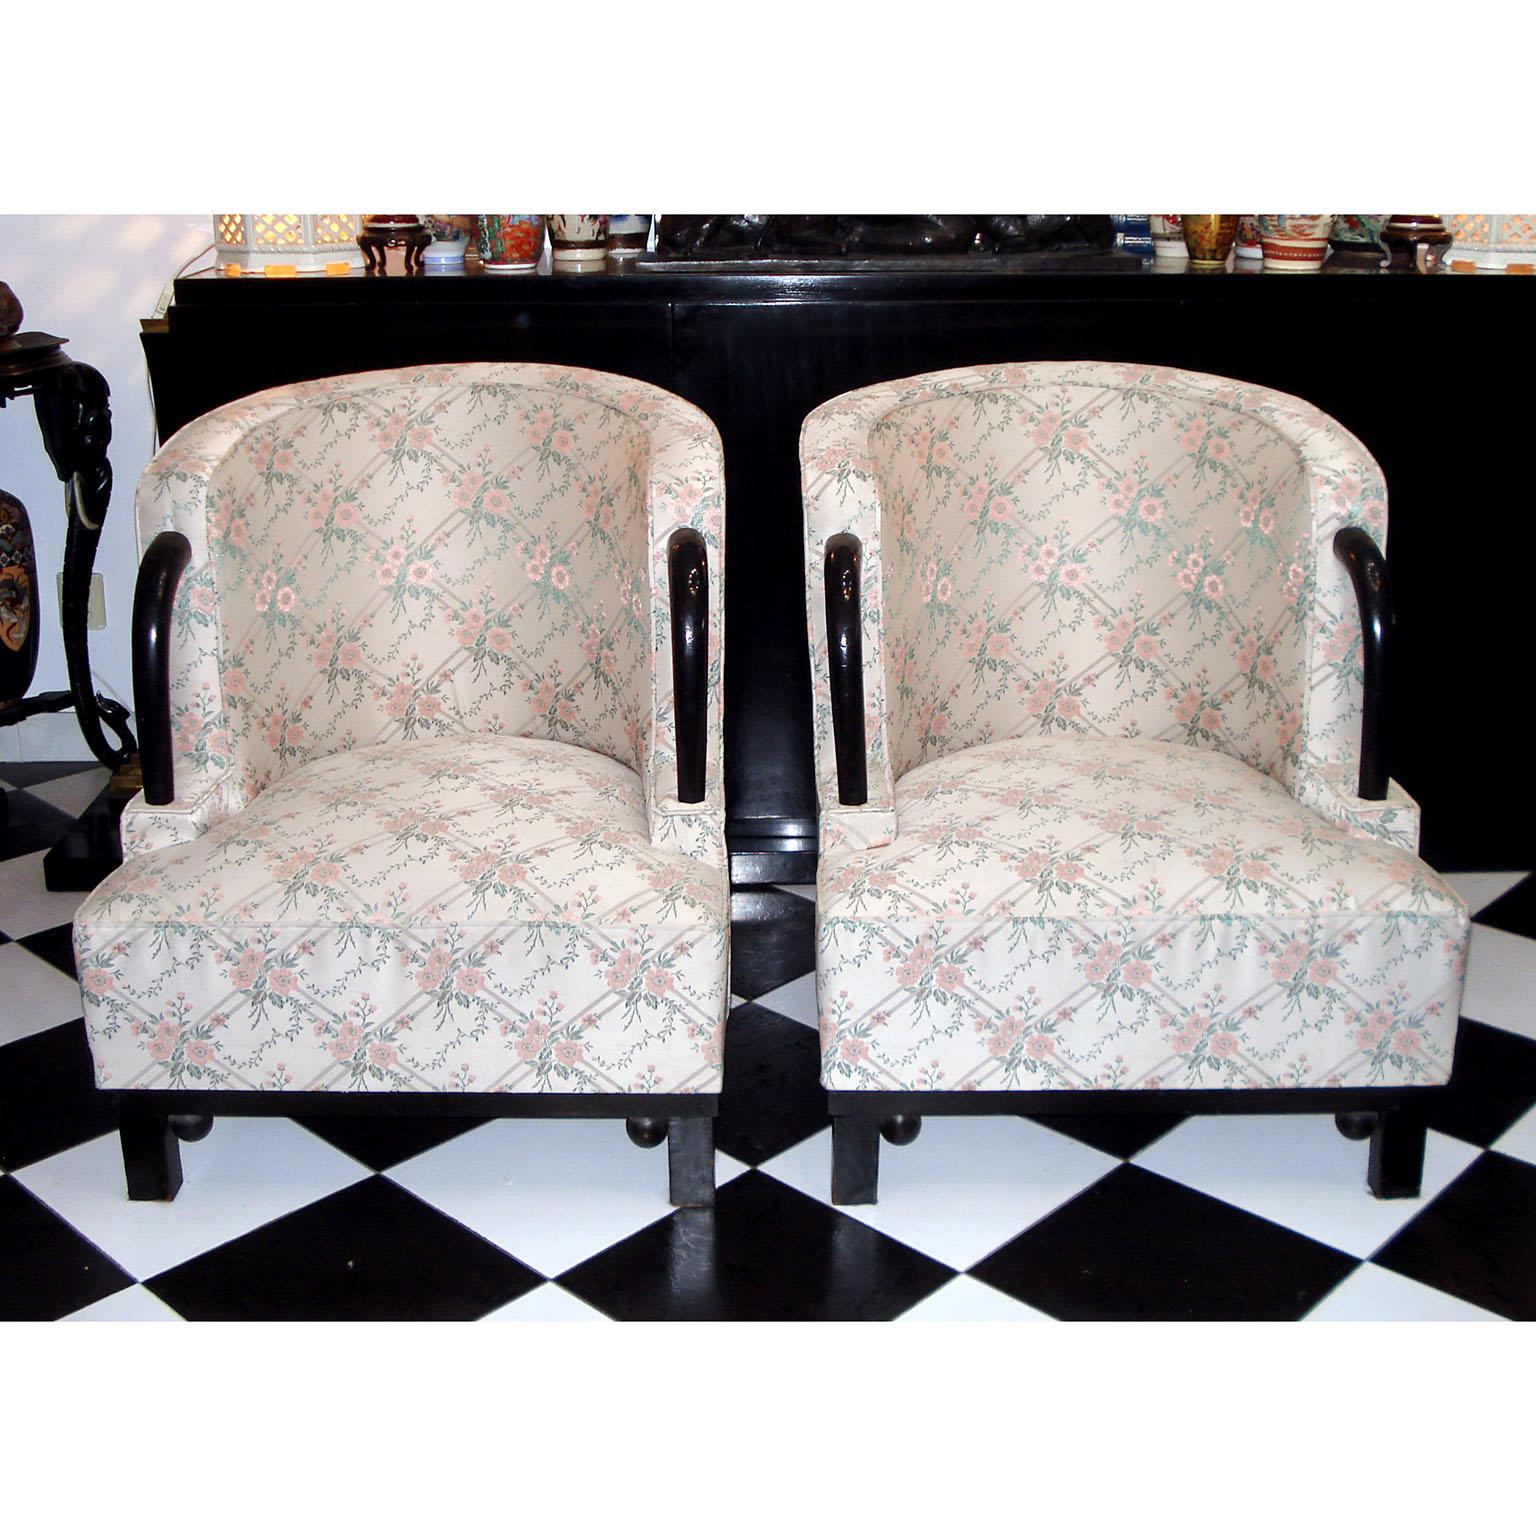 Mid-20th Century Unique Pair of Art Deco Armchairs by Hubert Martin et Ploquin, France, 1930s For Sale